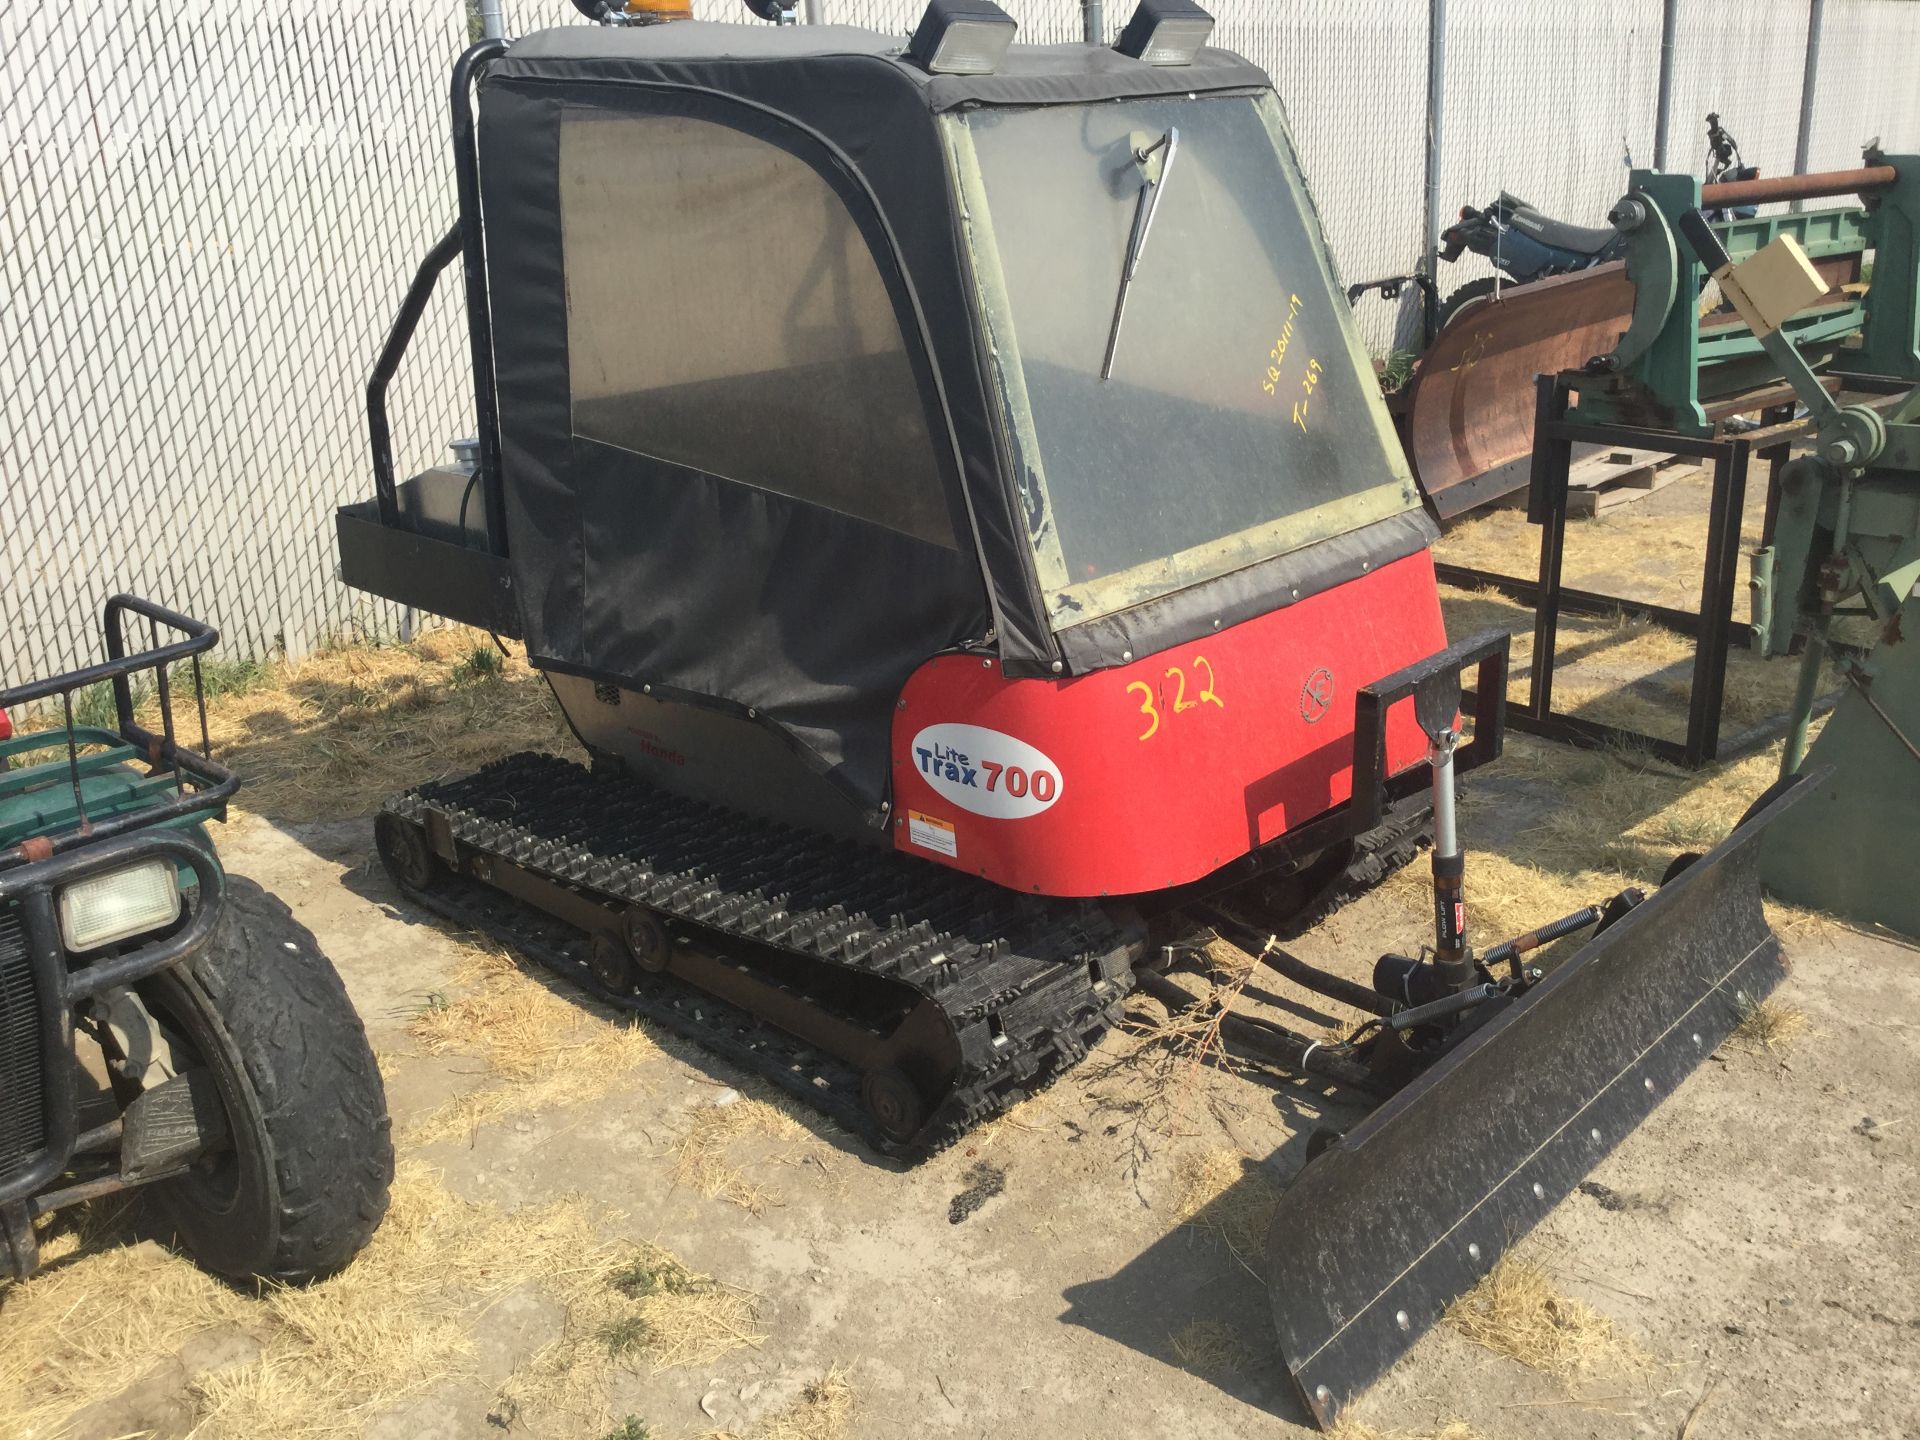 Year: 2006 Make: LiteTrax Model: 700 Type: Snowgroomer Vin#: 88002 Mileage/Hours: 148 HRS With plow.